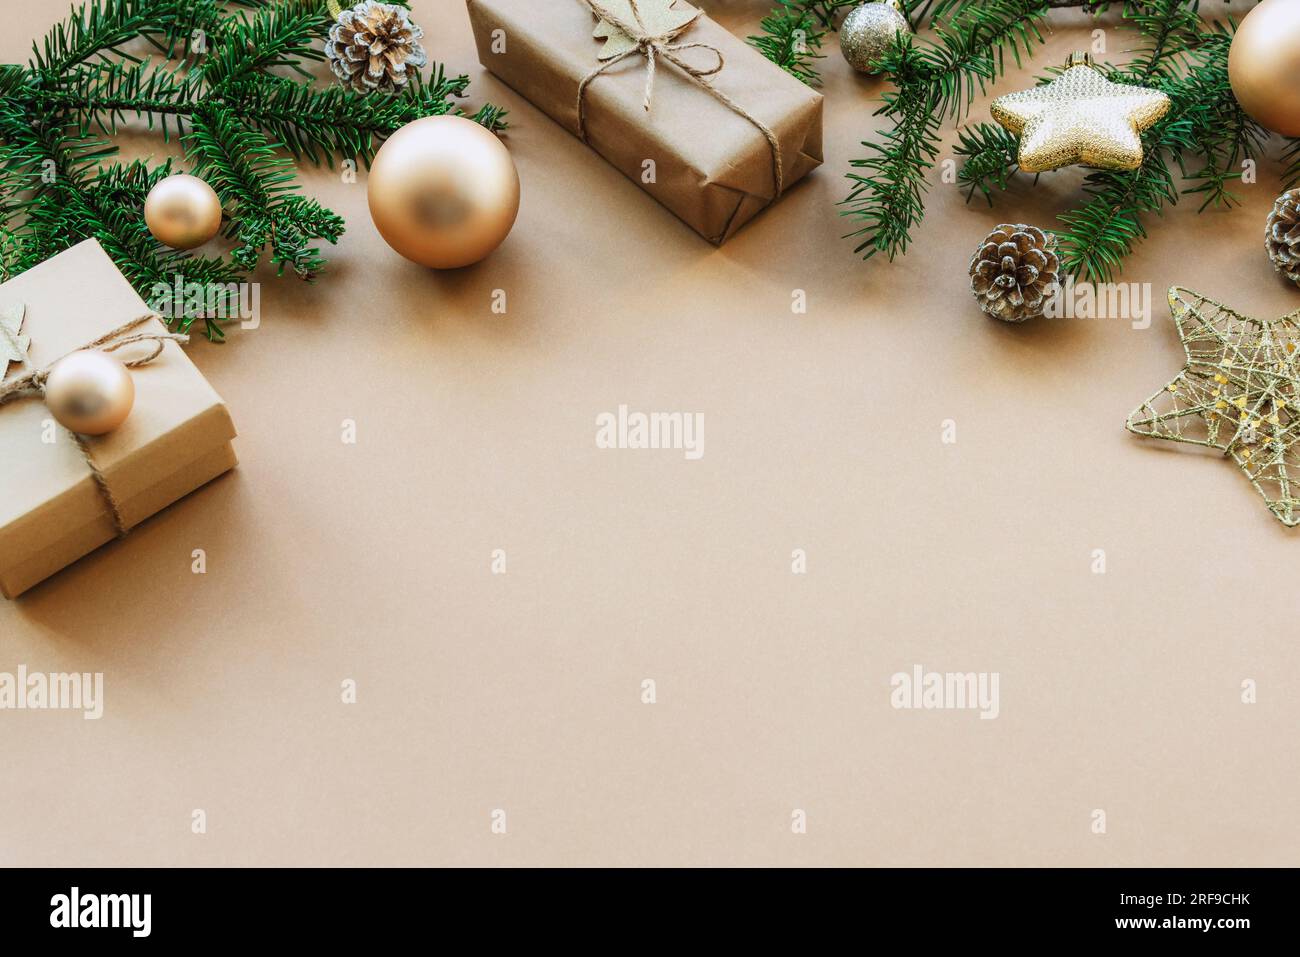 Festive Christmas background with spruce twigs, gift boxes and baubles on beige table. Top view, flat lay, copy space. Stock Photo